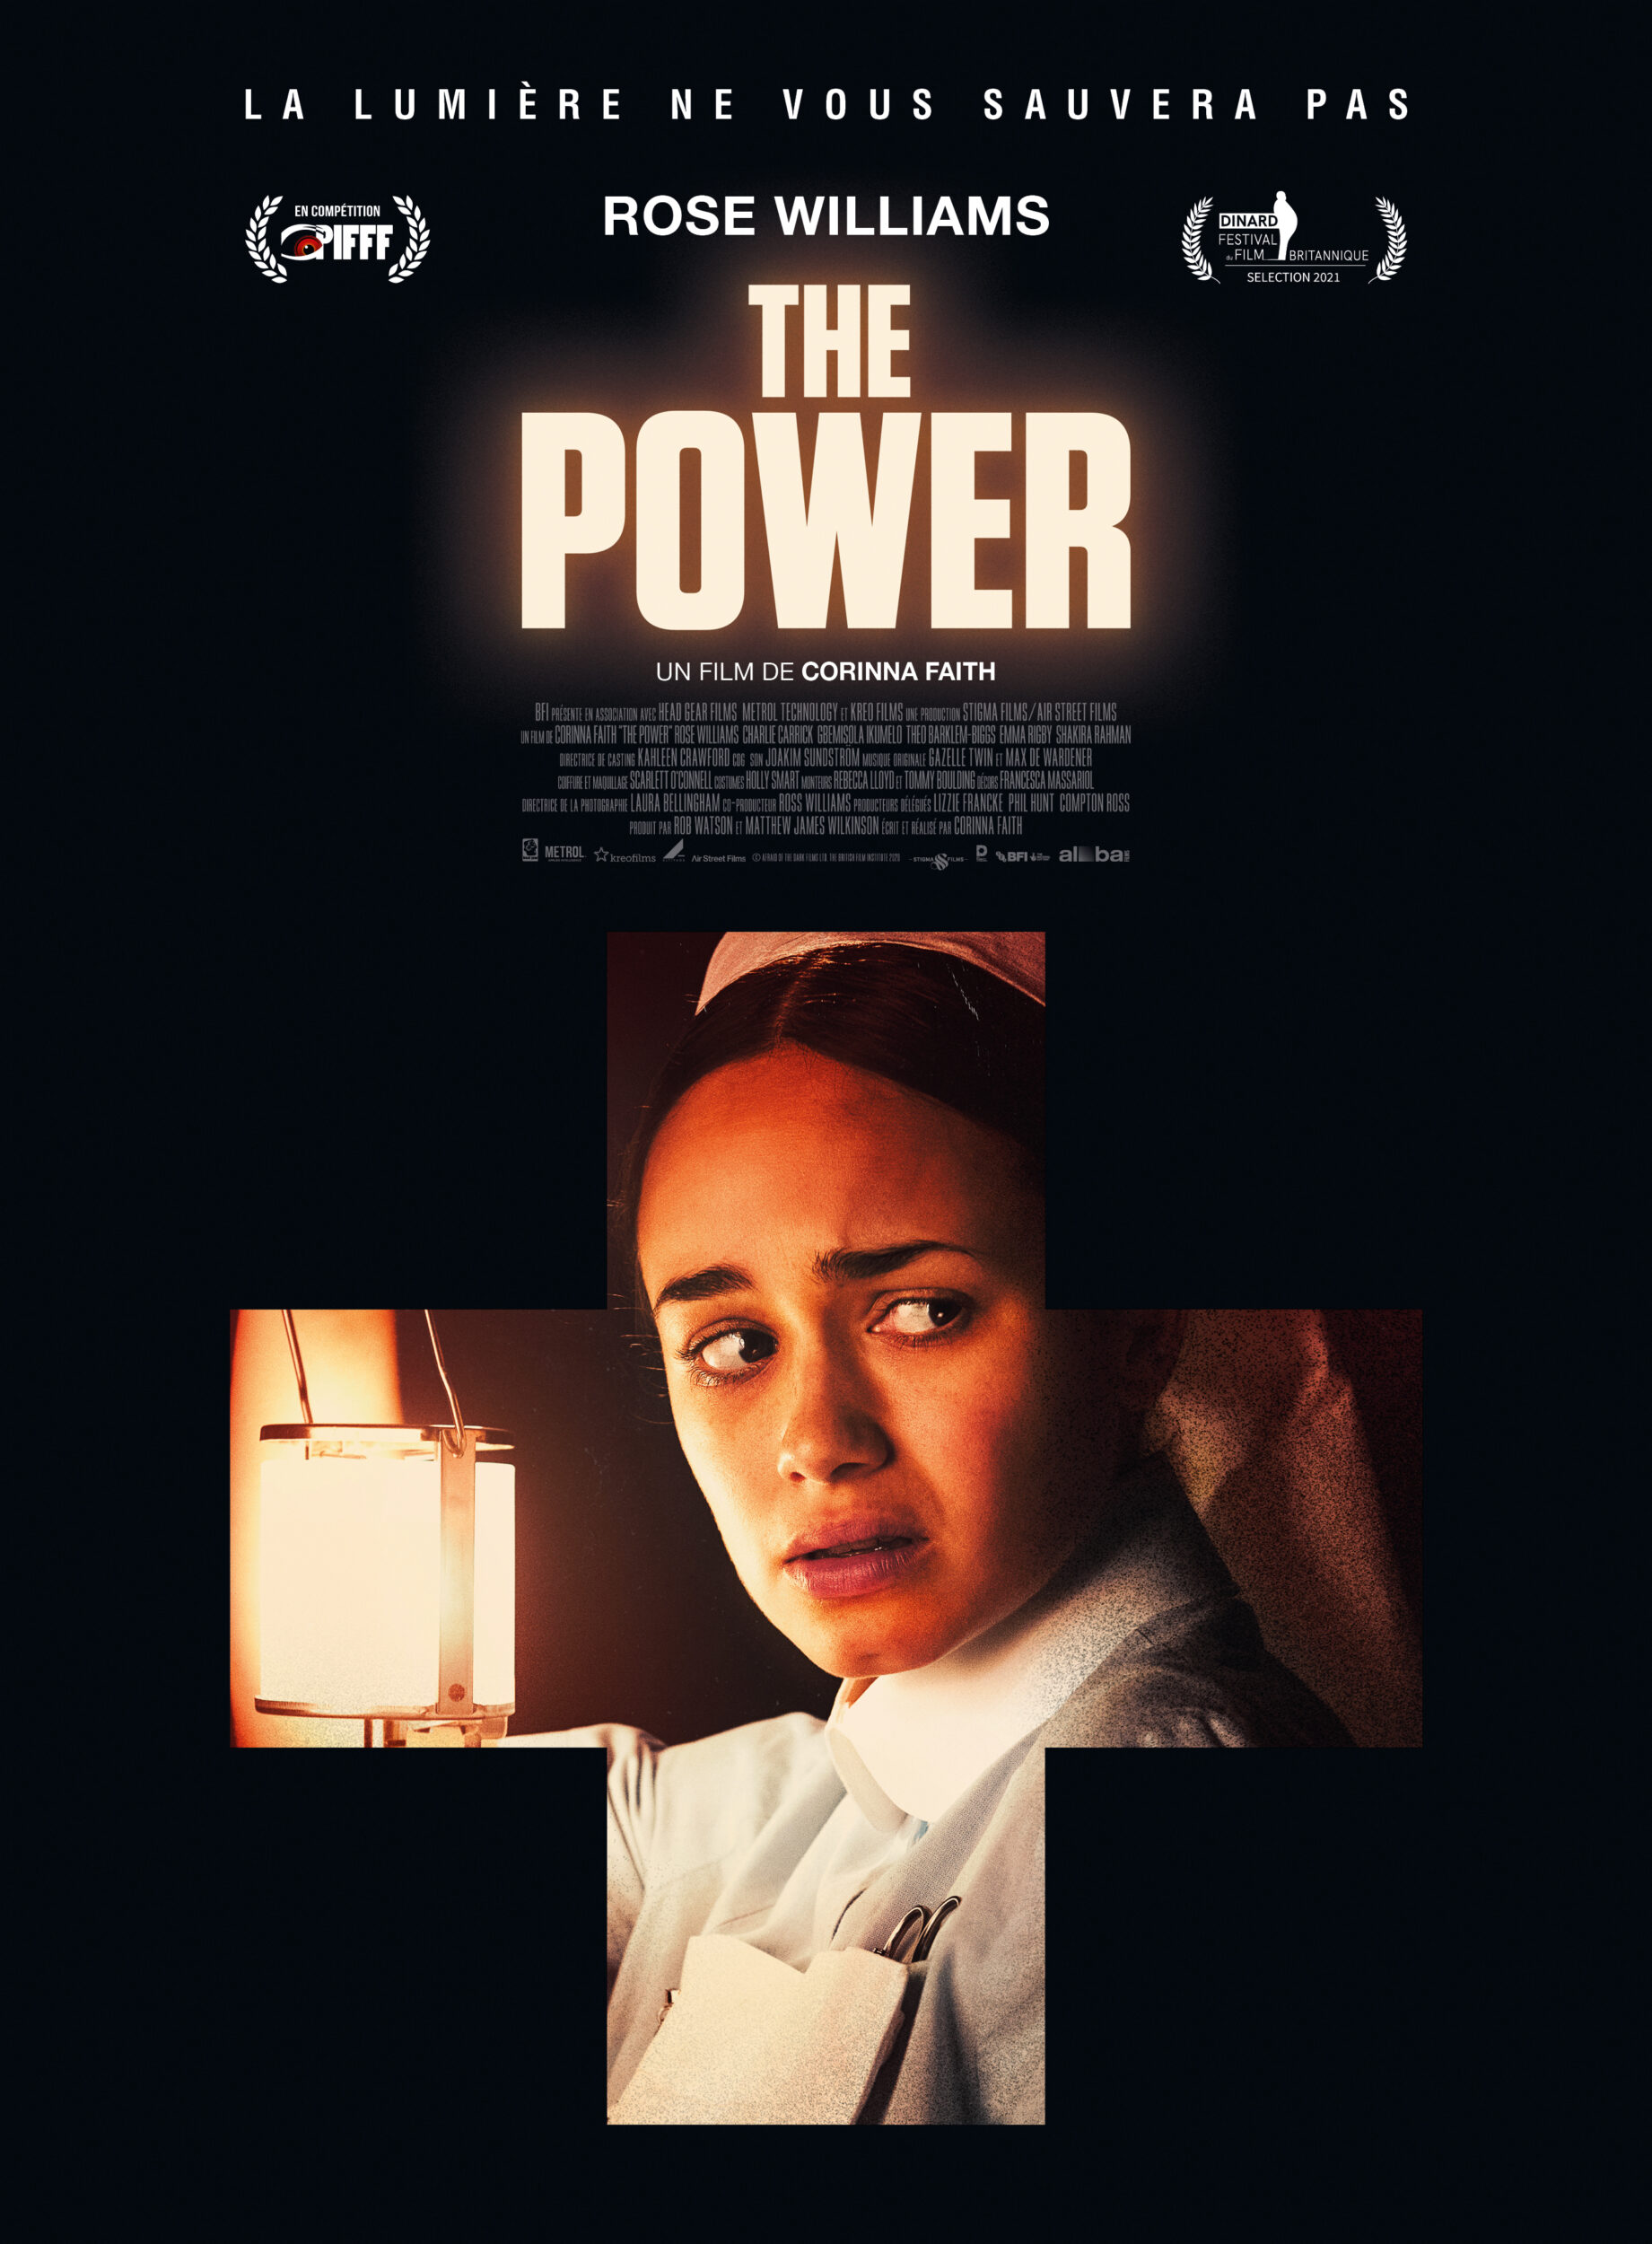 the-power-alba-films-twitch-madmoizelle